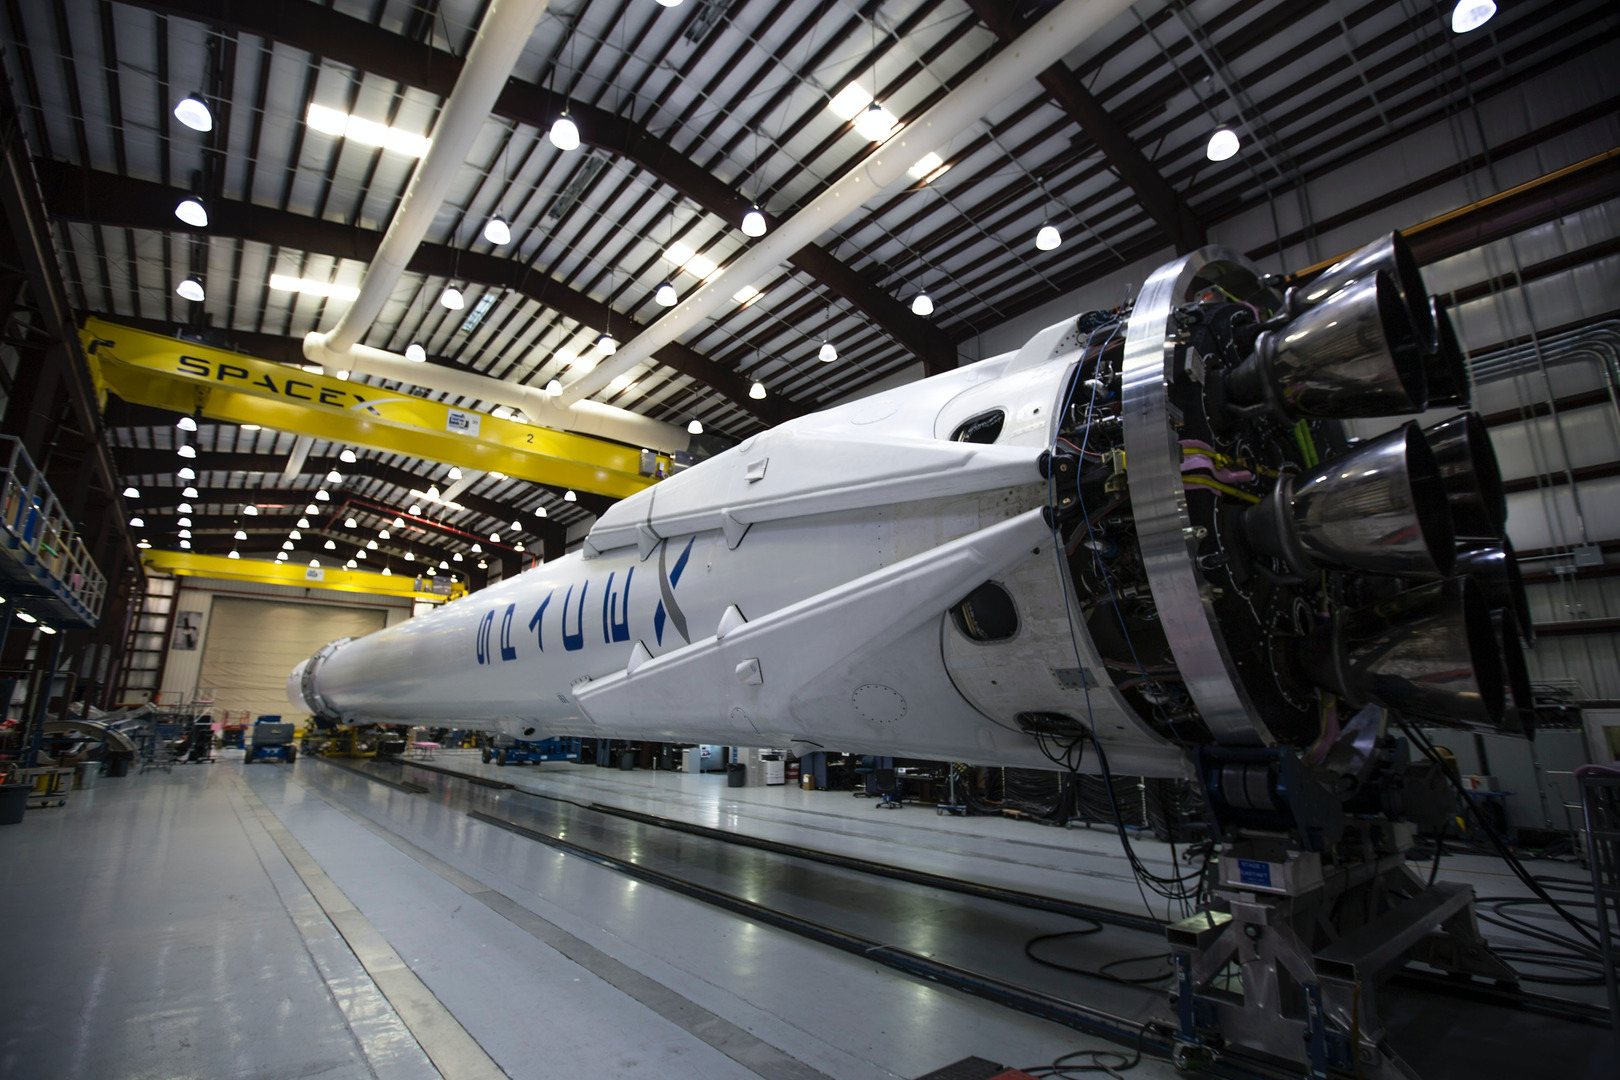 SpaceX rocket inside a building